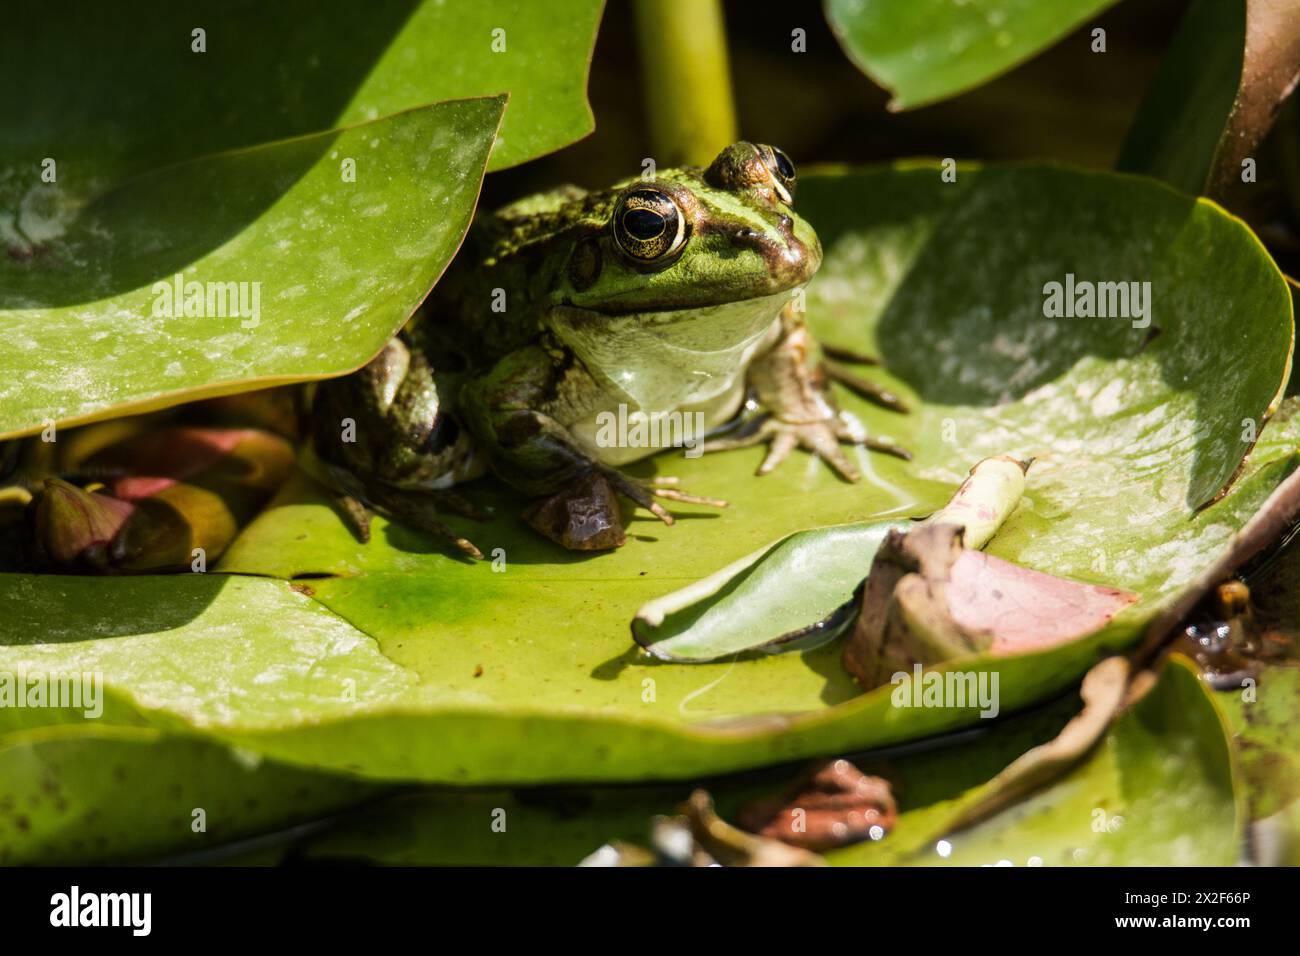 The Levant water frog (Pelophylax bedriagae), formerly belonging to the genus Rana, is a southern European species of frog. They are green to brown in Stock Photo